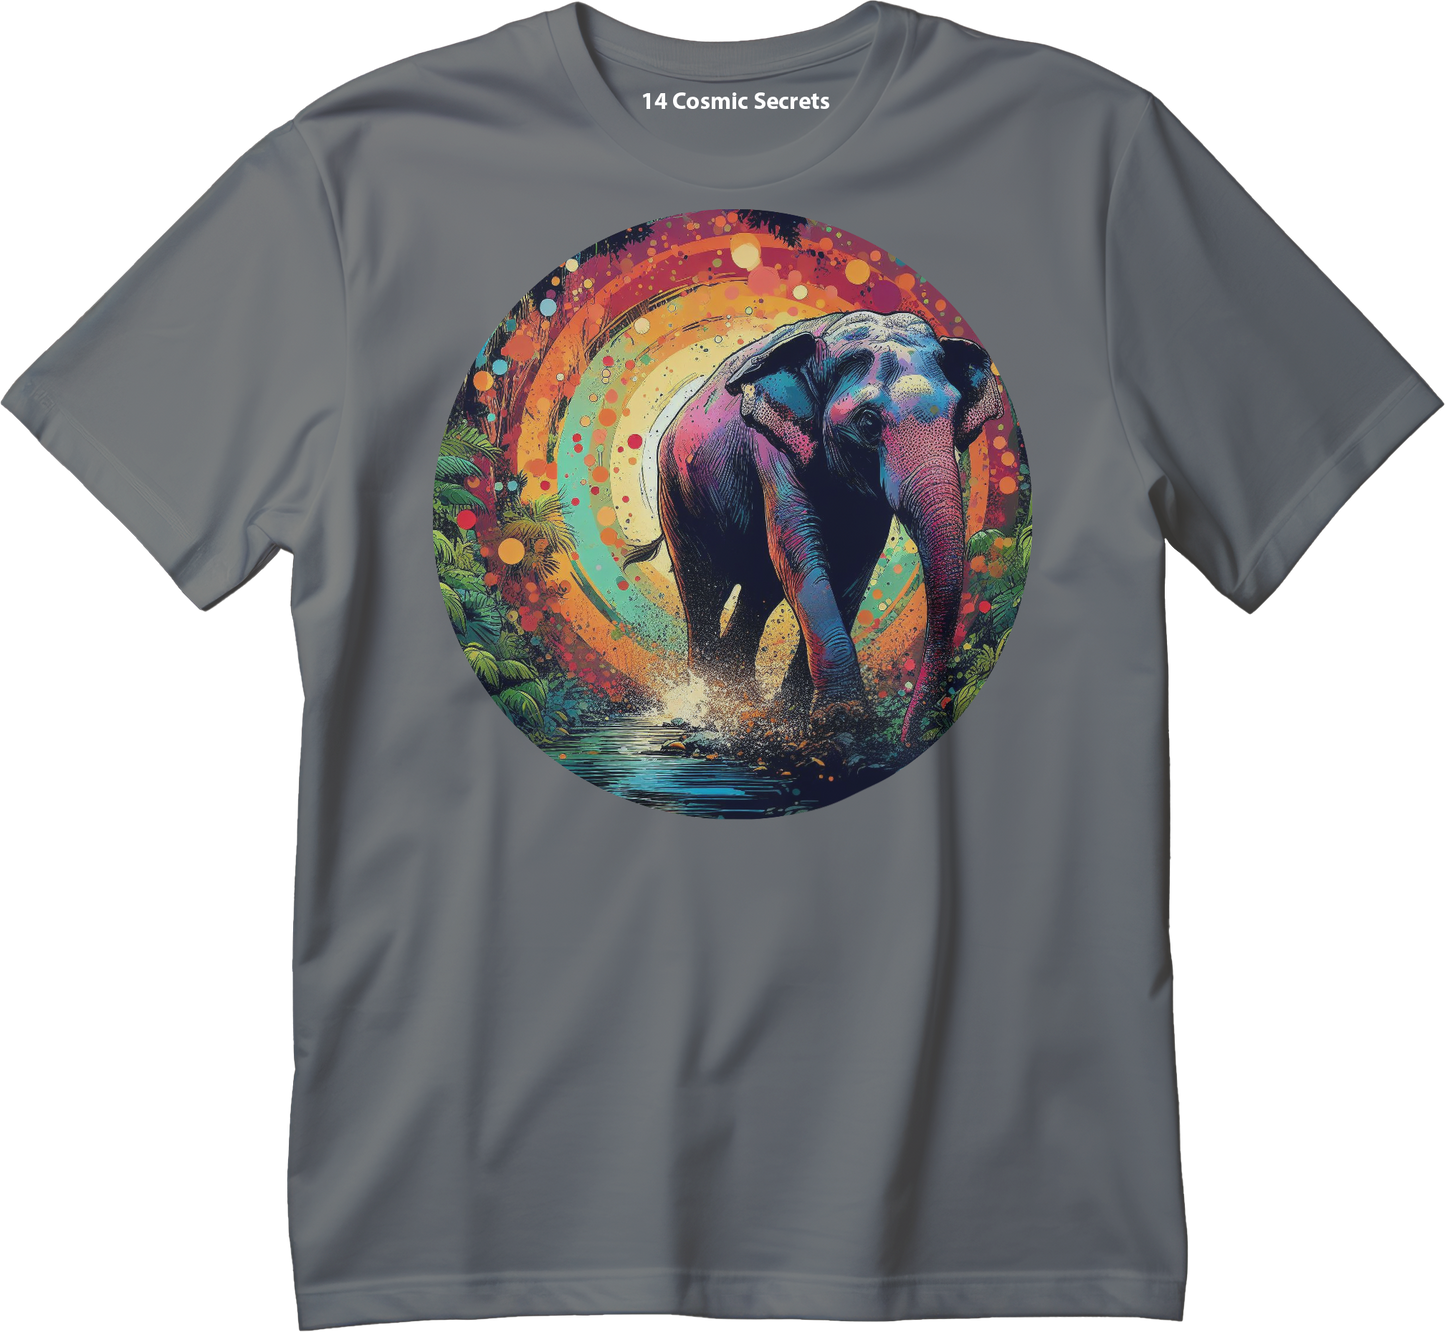 Celebrate the Indian Elephant  Graphic Printed T-Shirt  Cotton T-Shirt Magnificence of India T-Shirt